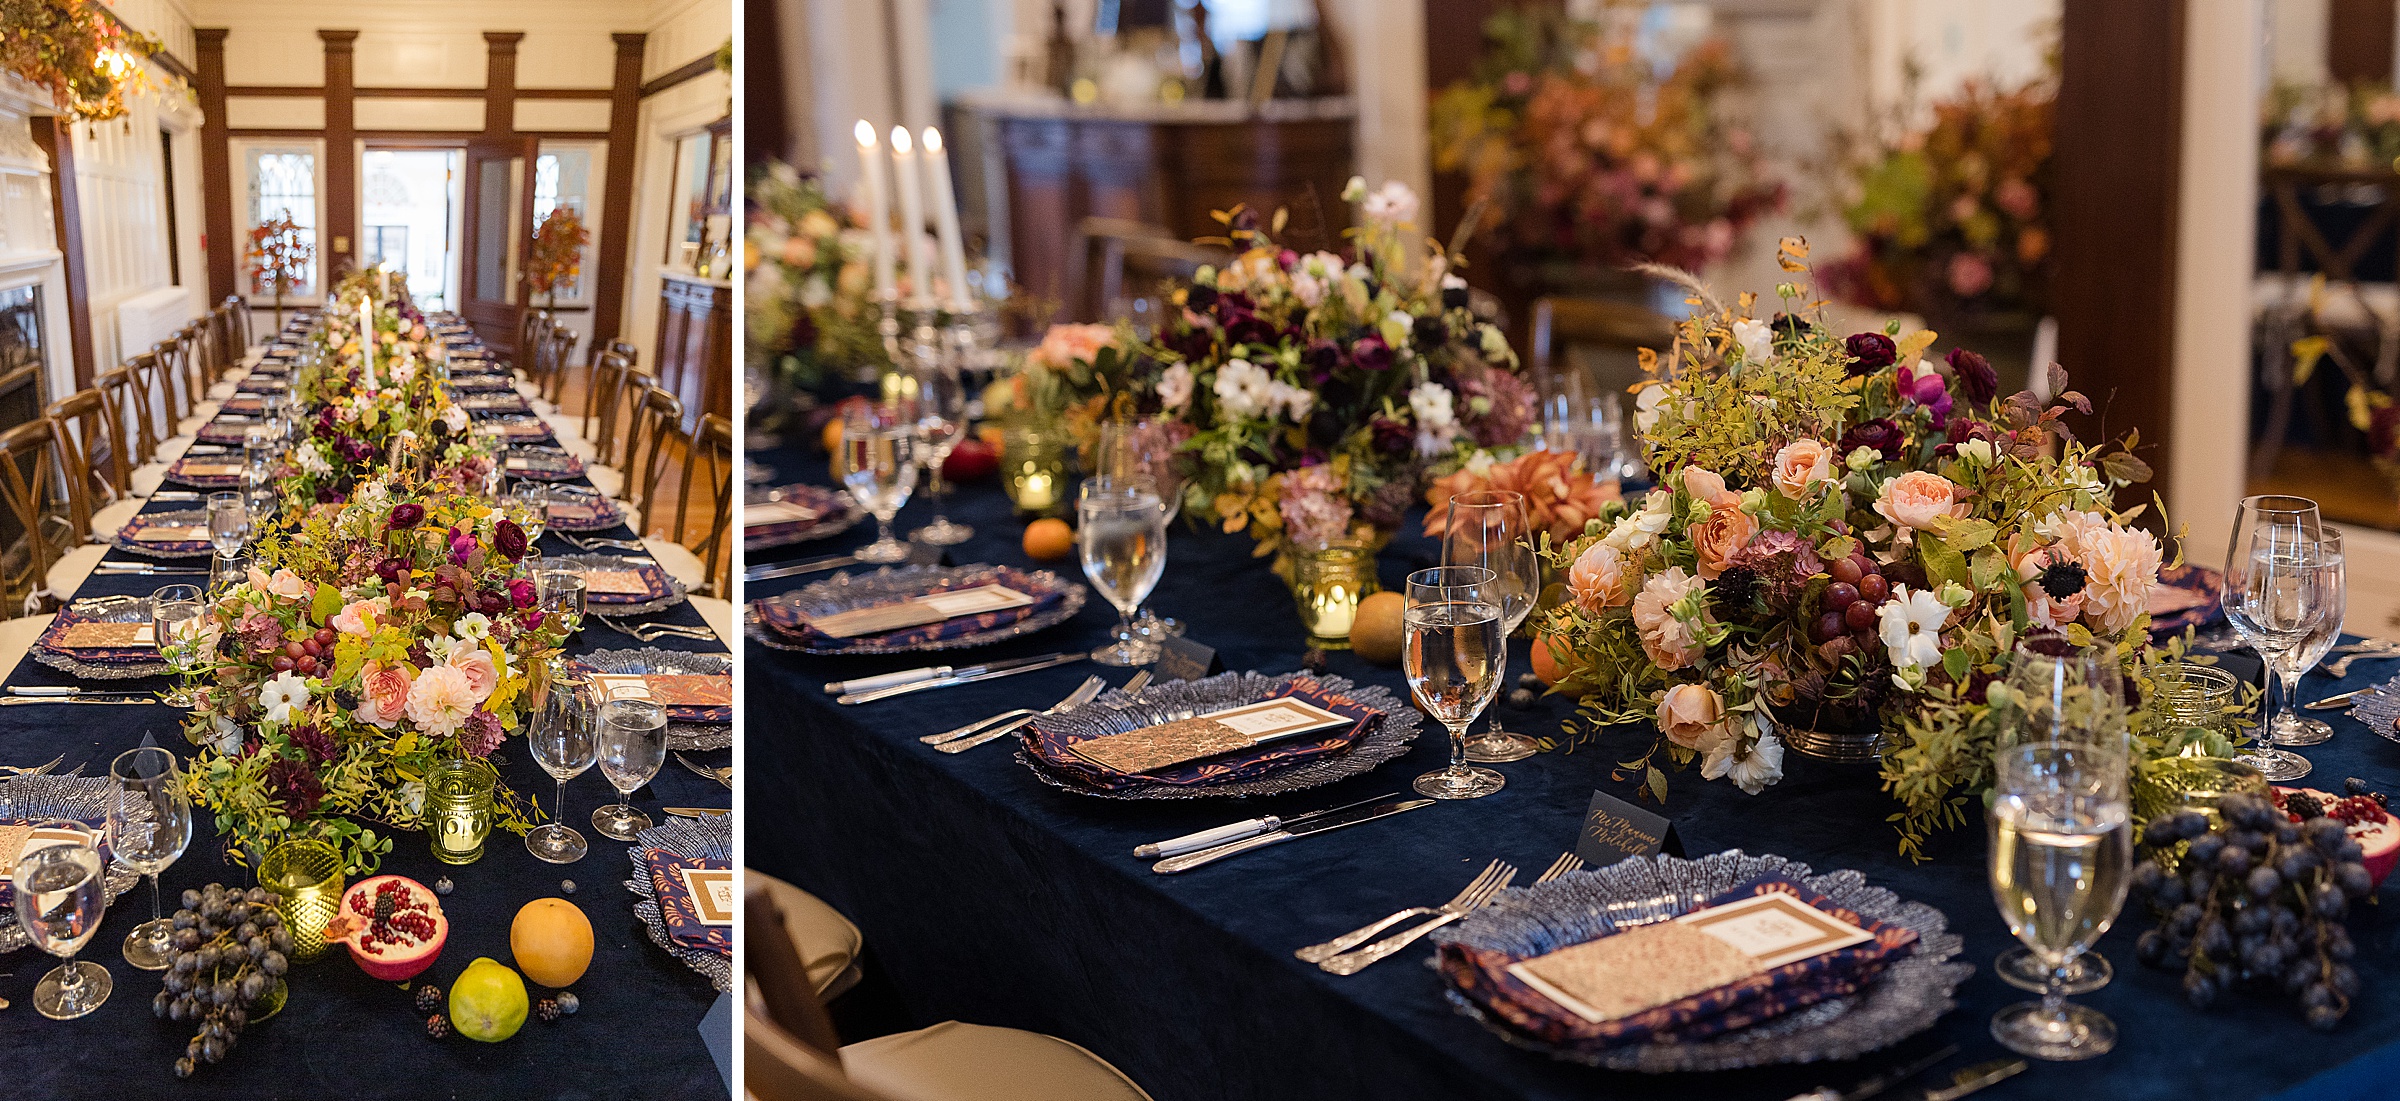 Navy table setting decor with pink flowers for small wedding at The Inn at Burklyn